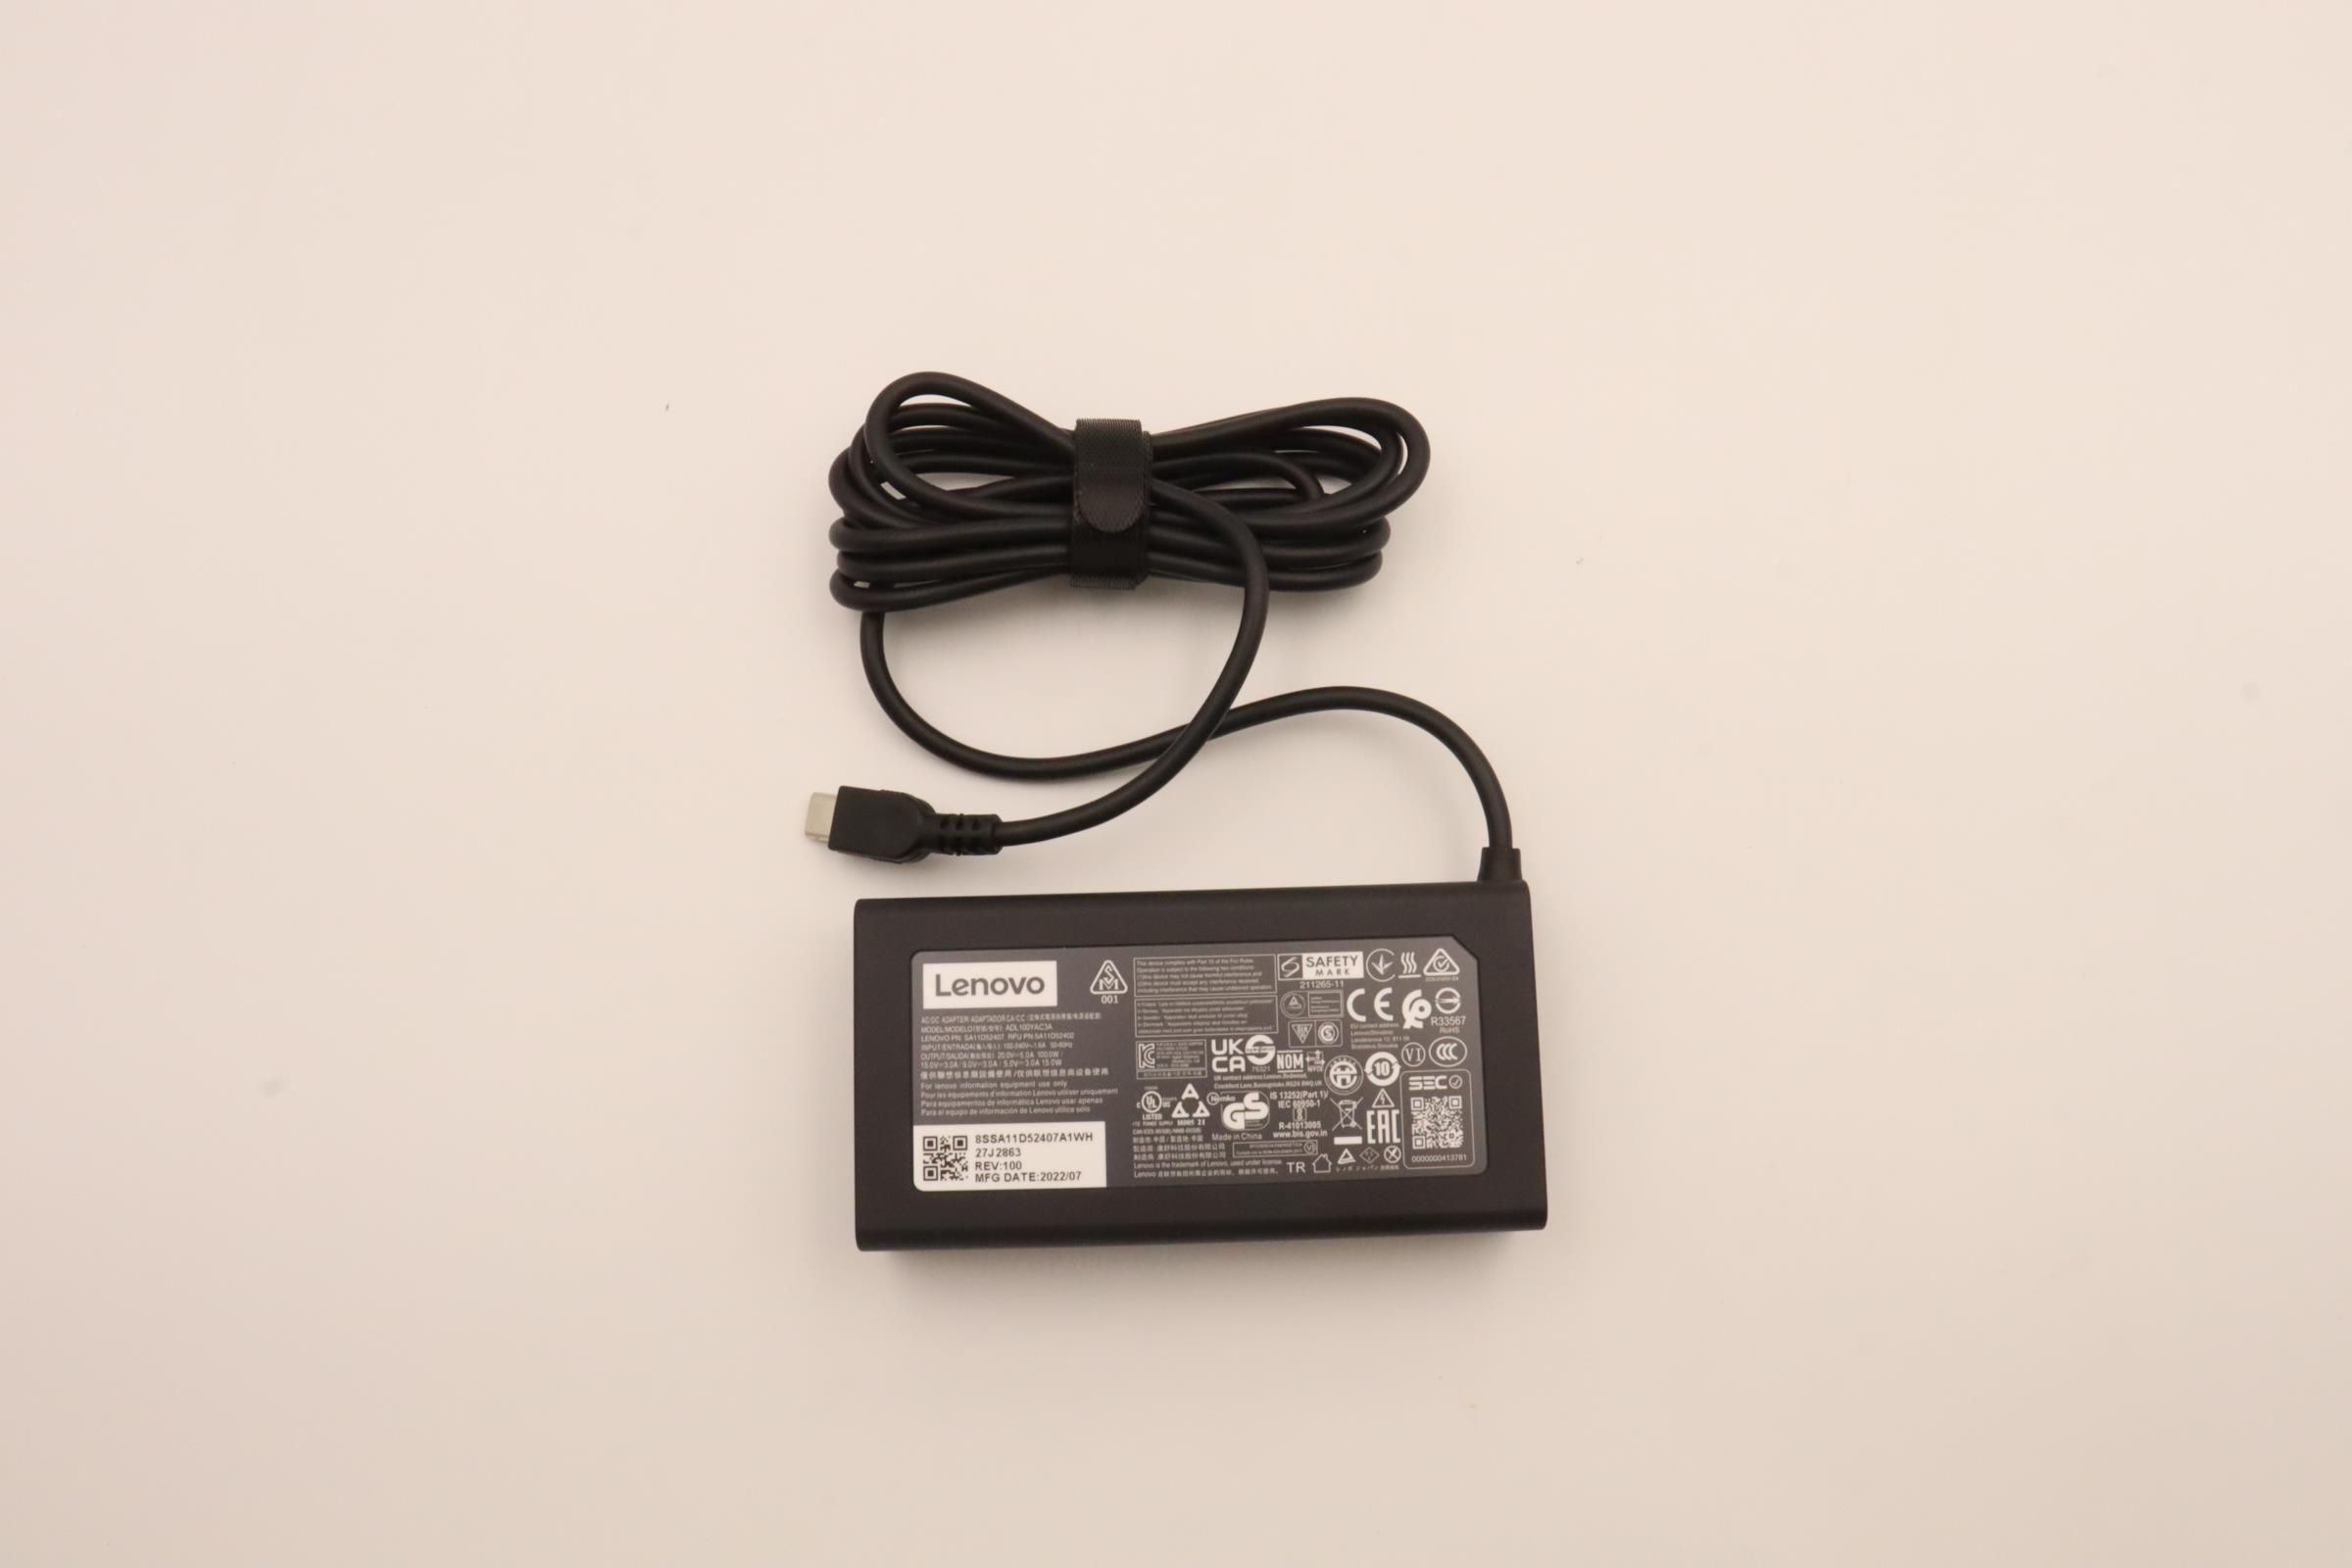 Lenovo ThinkPad T16 Gen 1 (21CH, 21CJ) Laptop Charger (AC Adapter) - 5A11D52402